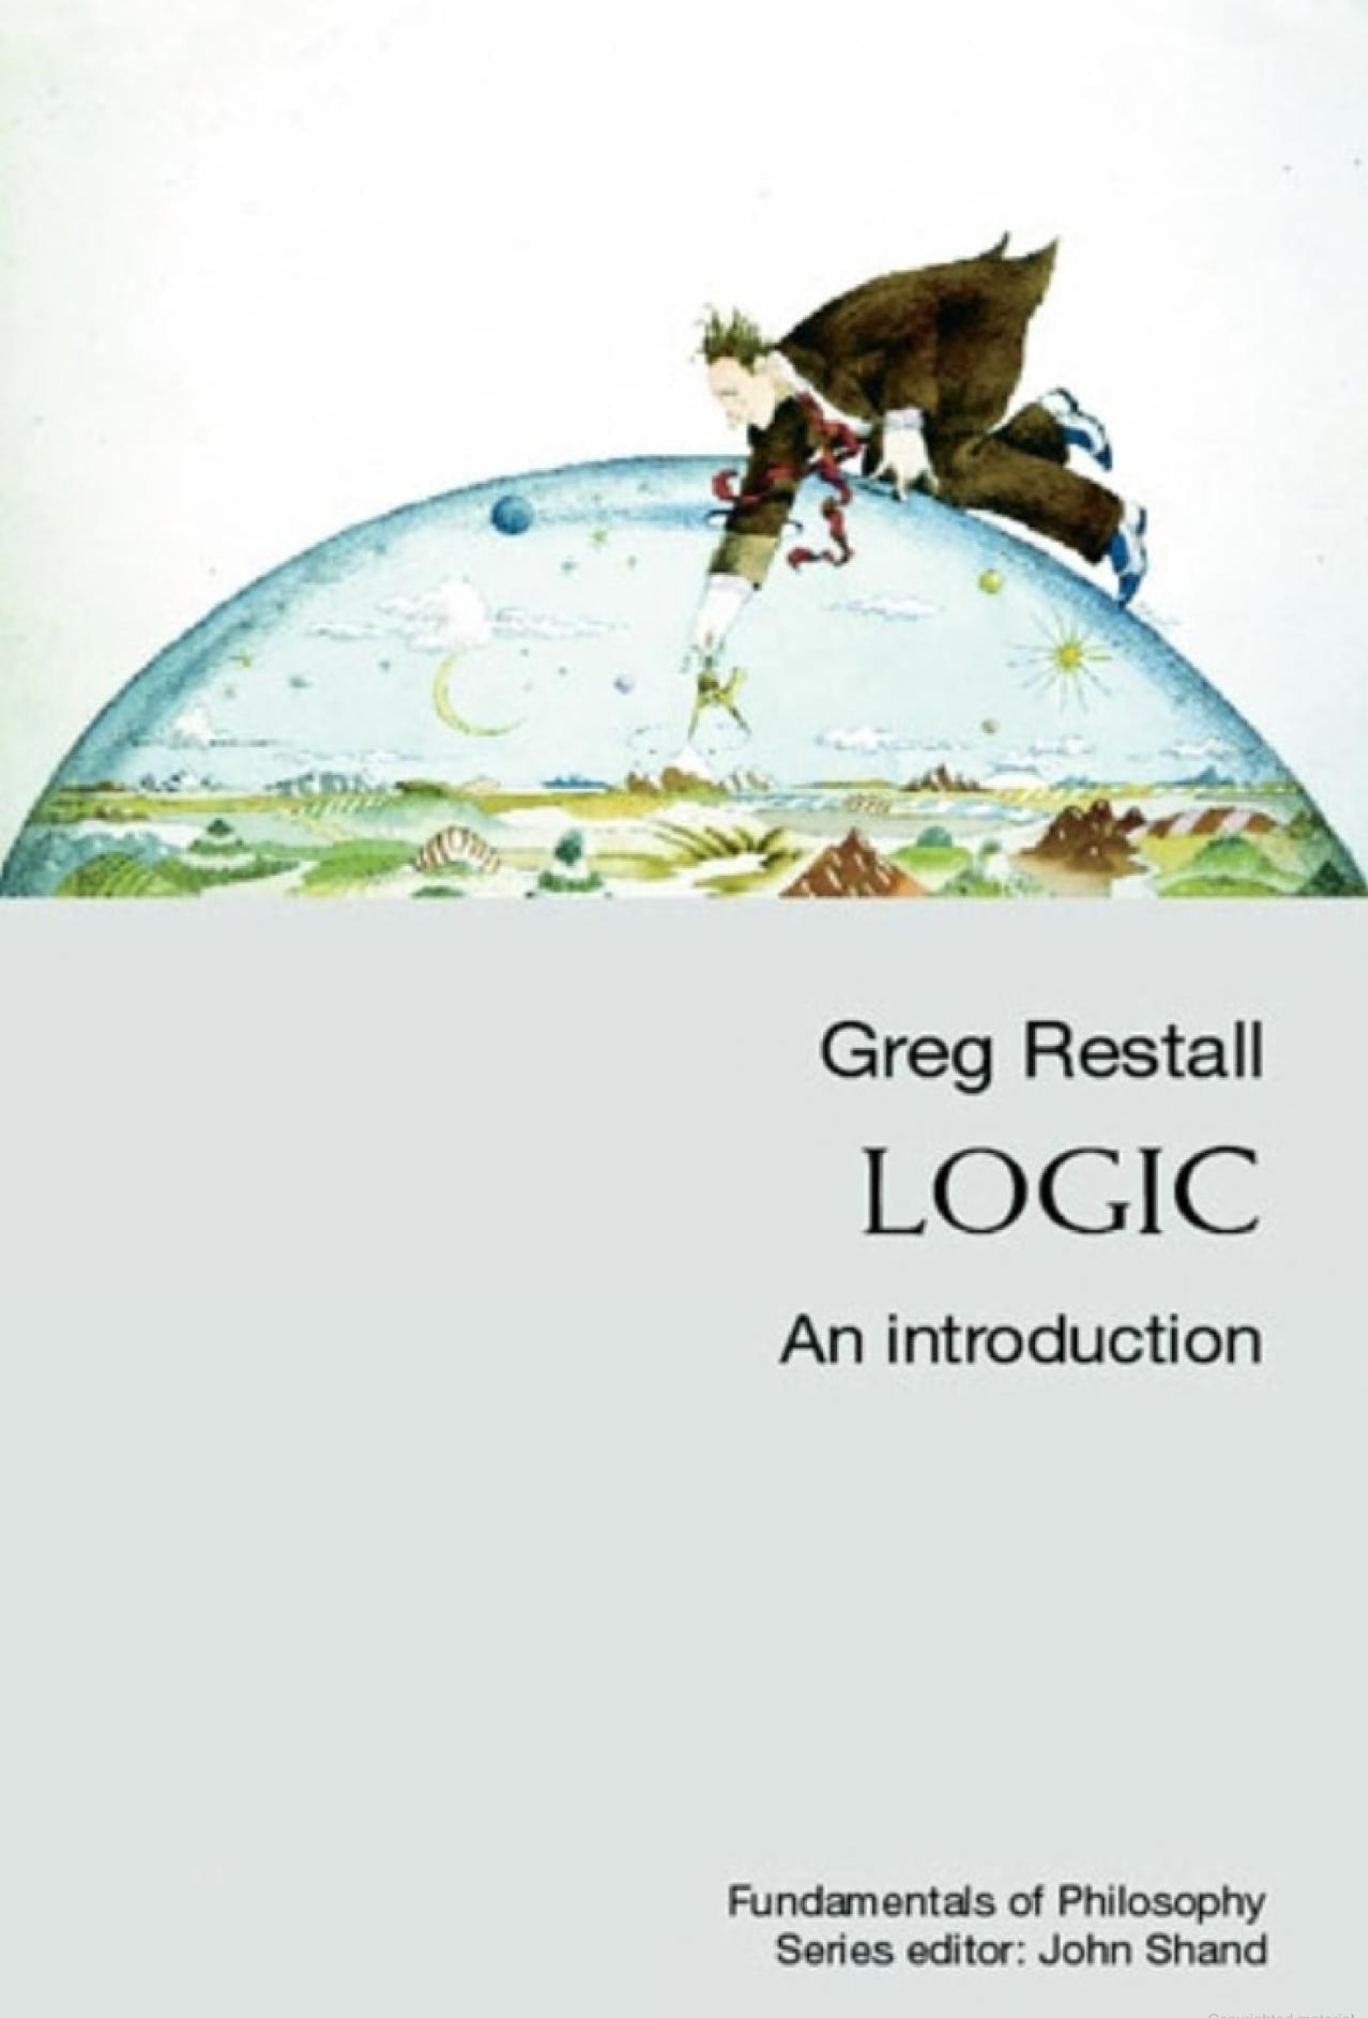 Cover Image of Logic